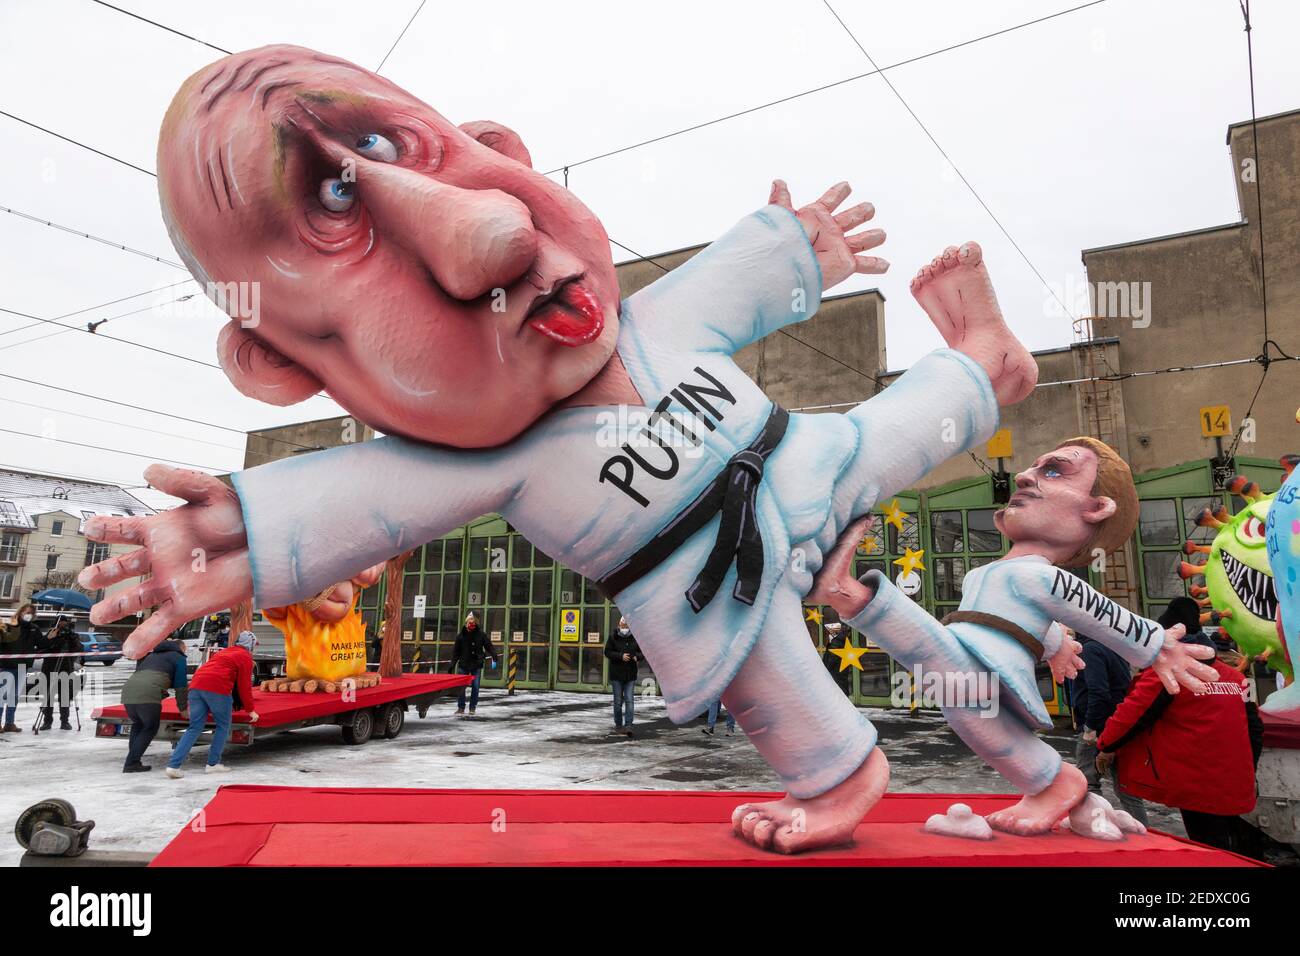 Dusseldorf, Germany. 15 February 2021. Conflict between Putin and Navalny Carnival floats created by German artist Jacques Tilly were presented and later exhibited throughout Dusseldorf as the main carnival parade was cancelled due to the coronavirus pandemic. Credit: Bettina Strenske/Alamy Live News Stock Photo